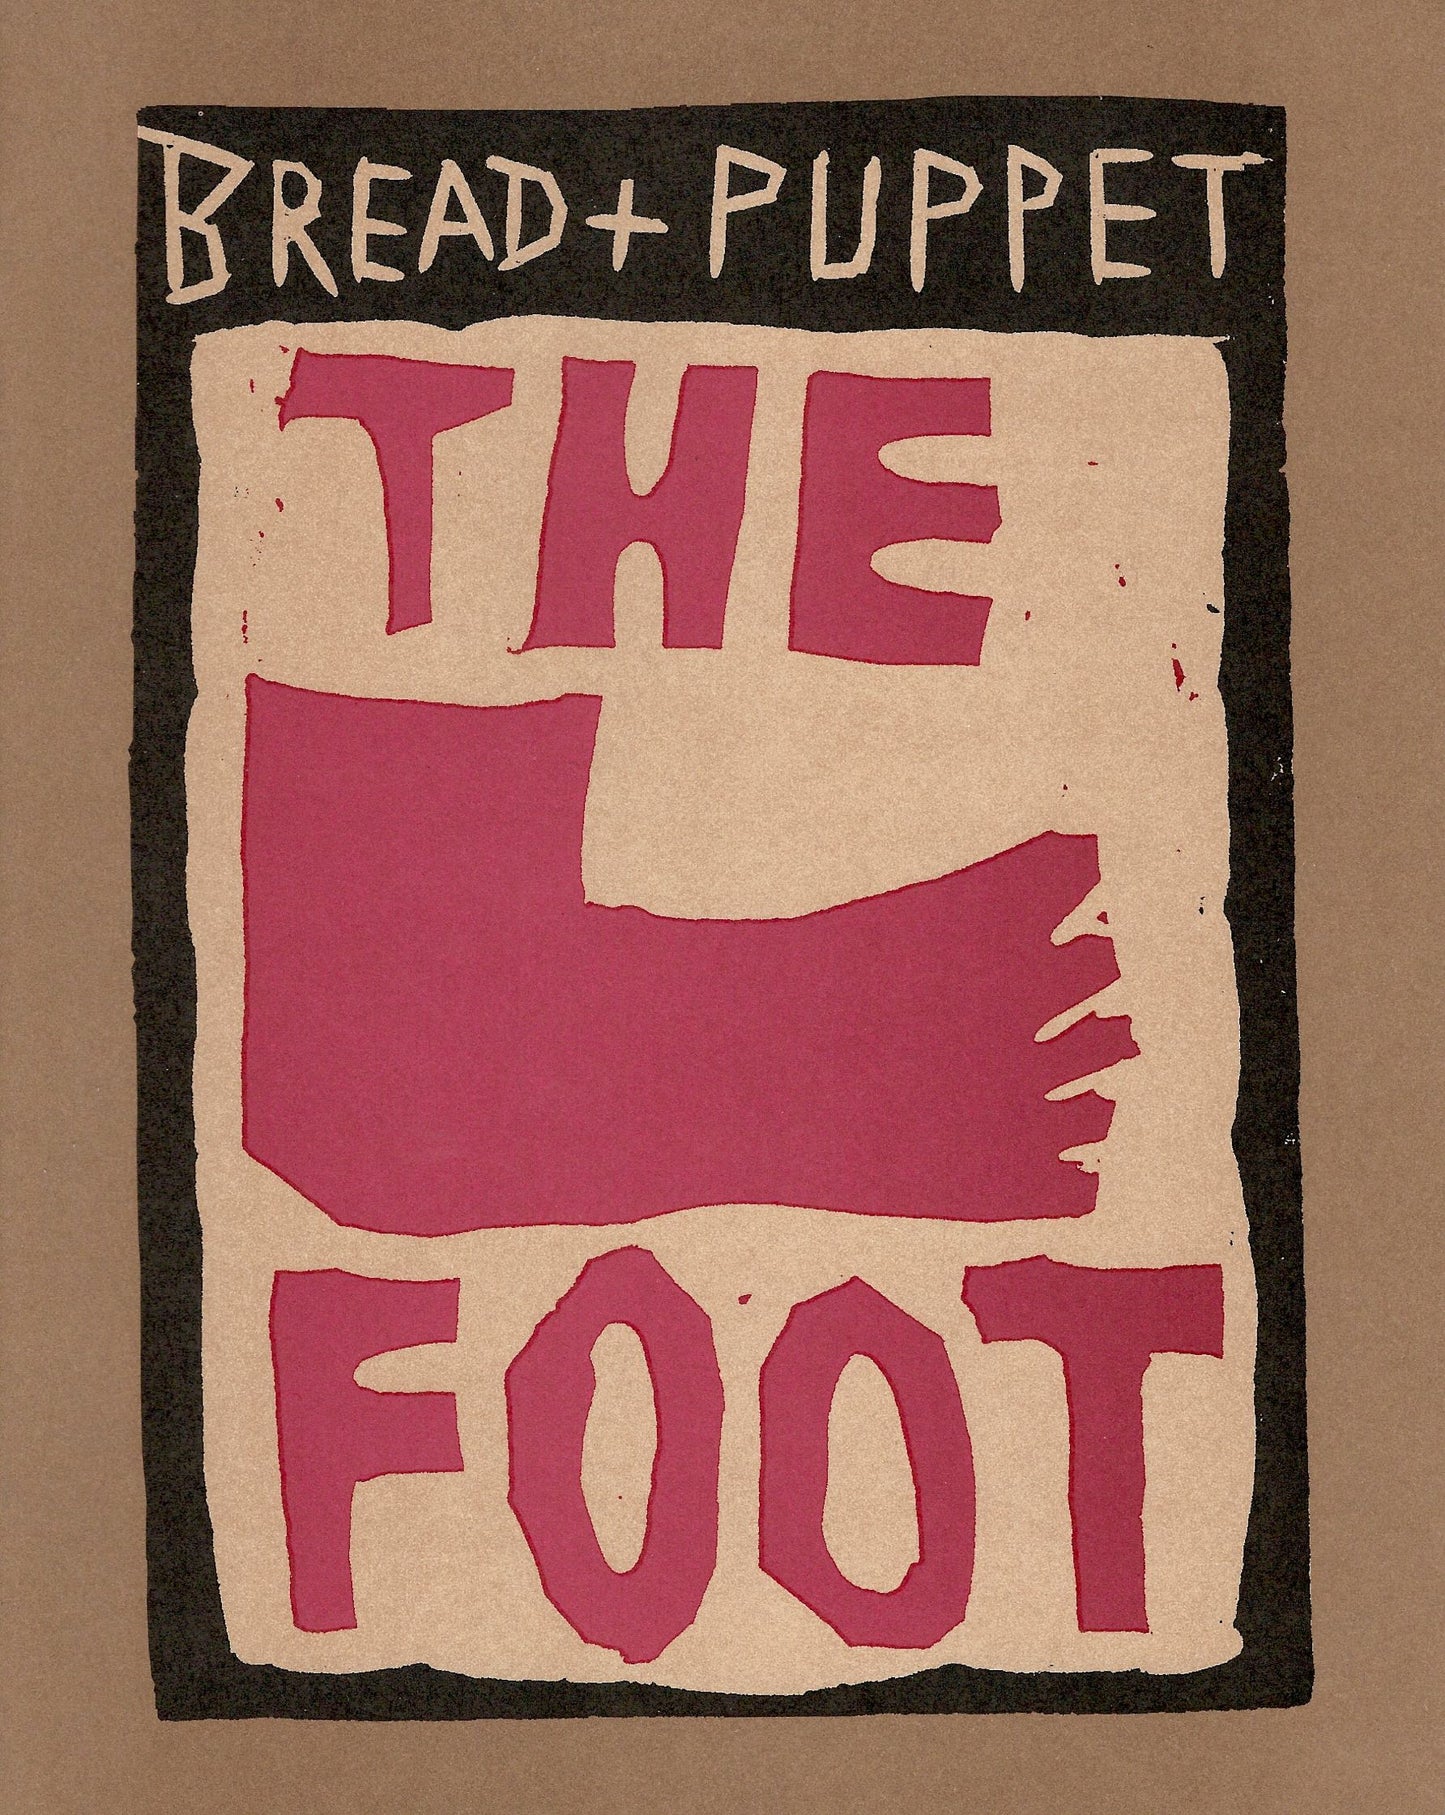 The Foot